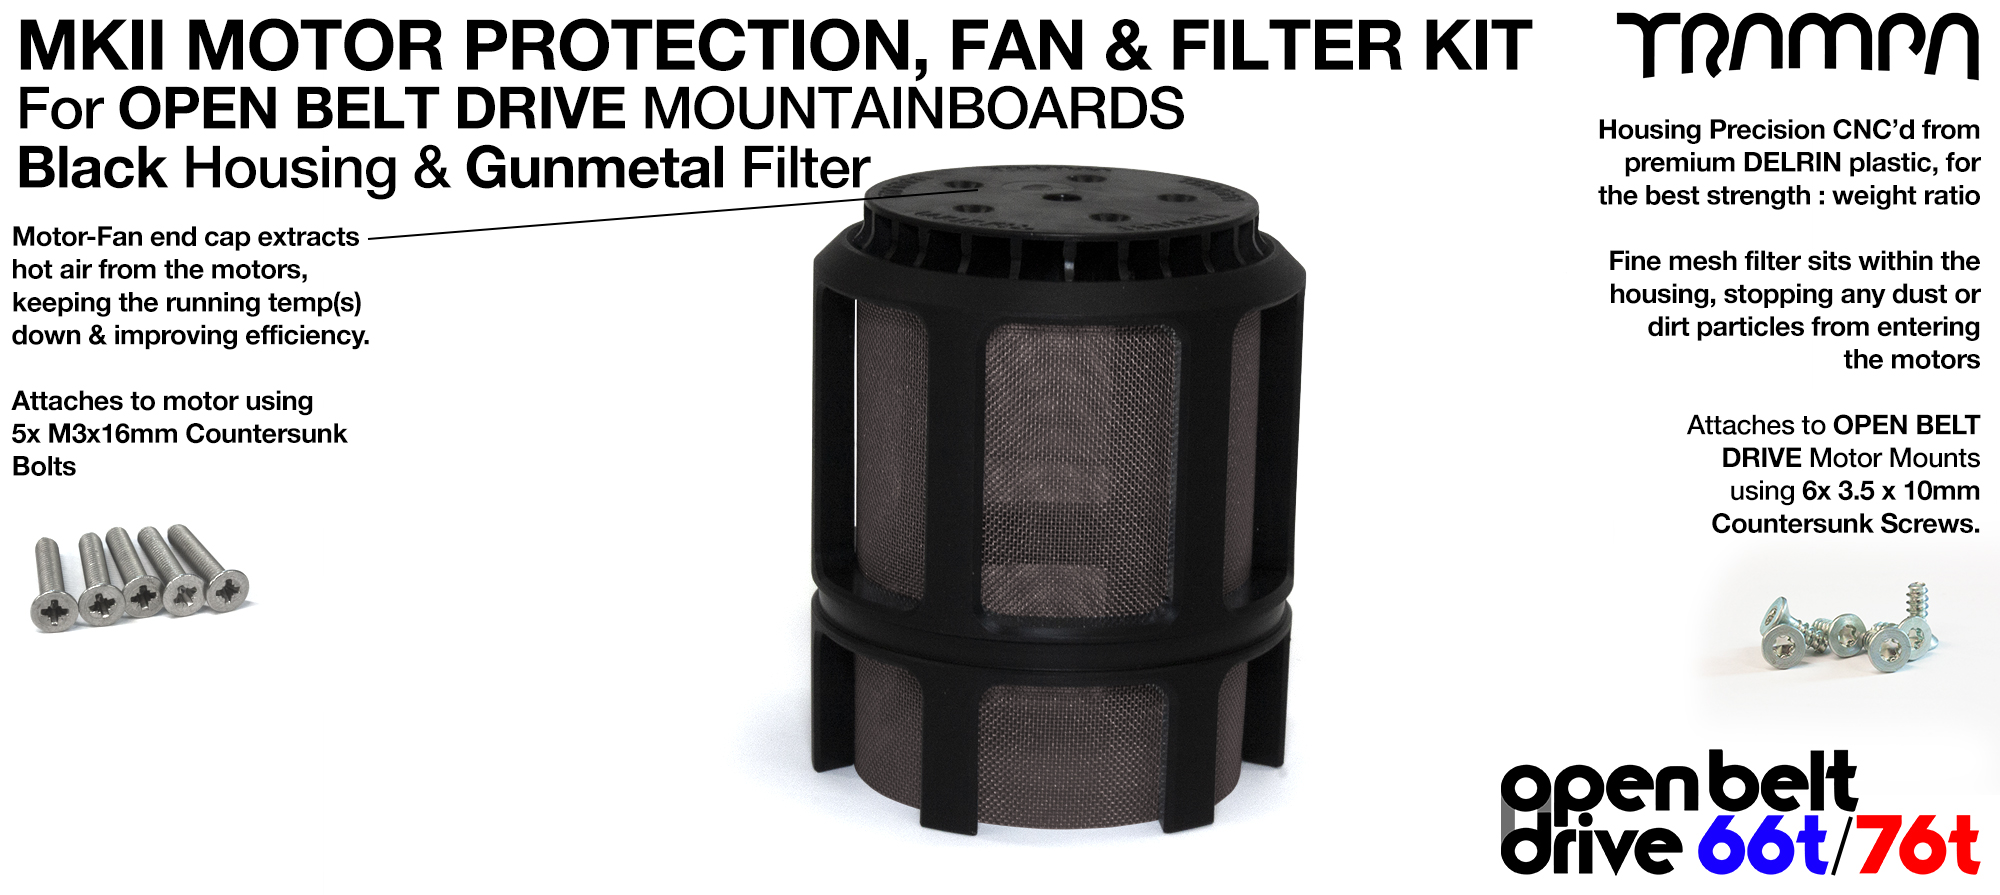 1x OBD MKII Motor protection Sleeve with GUNMETAL Filter